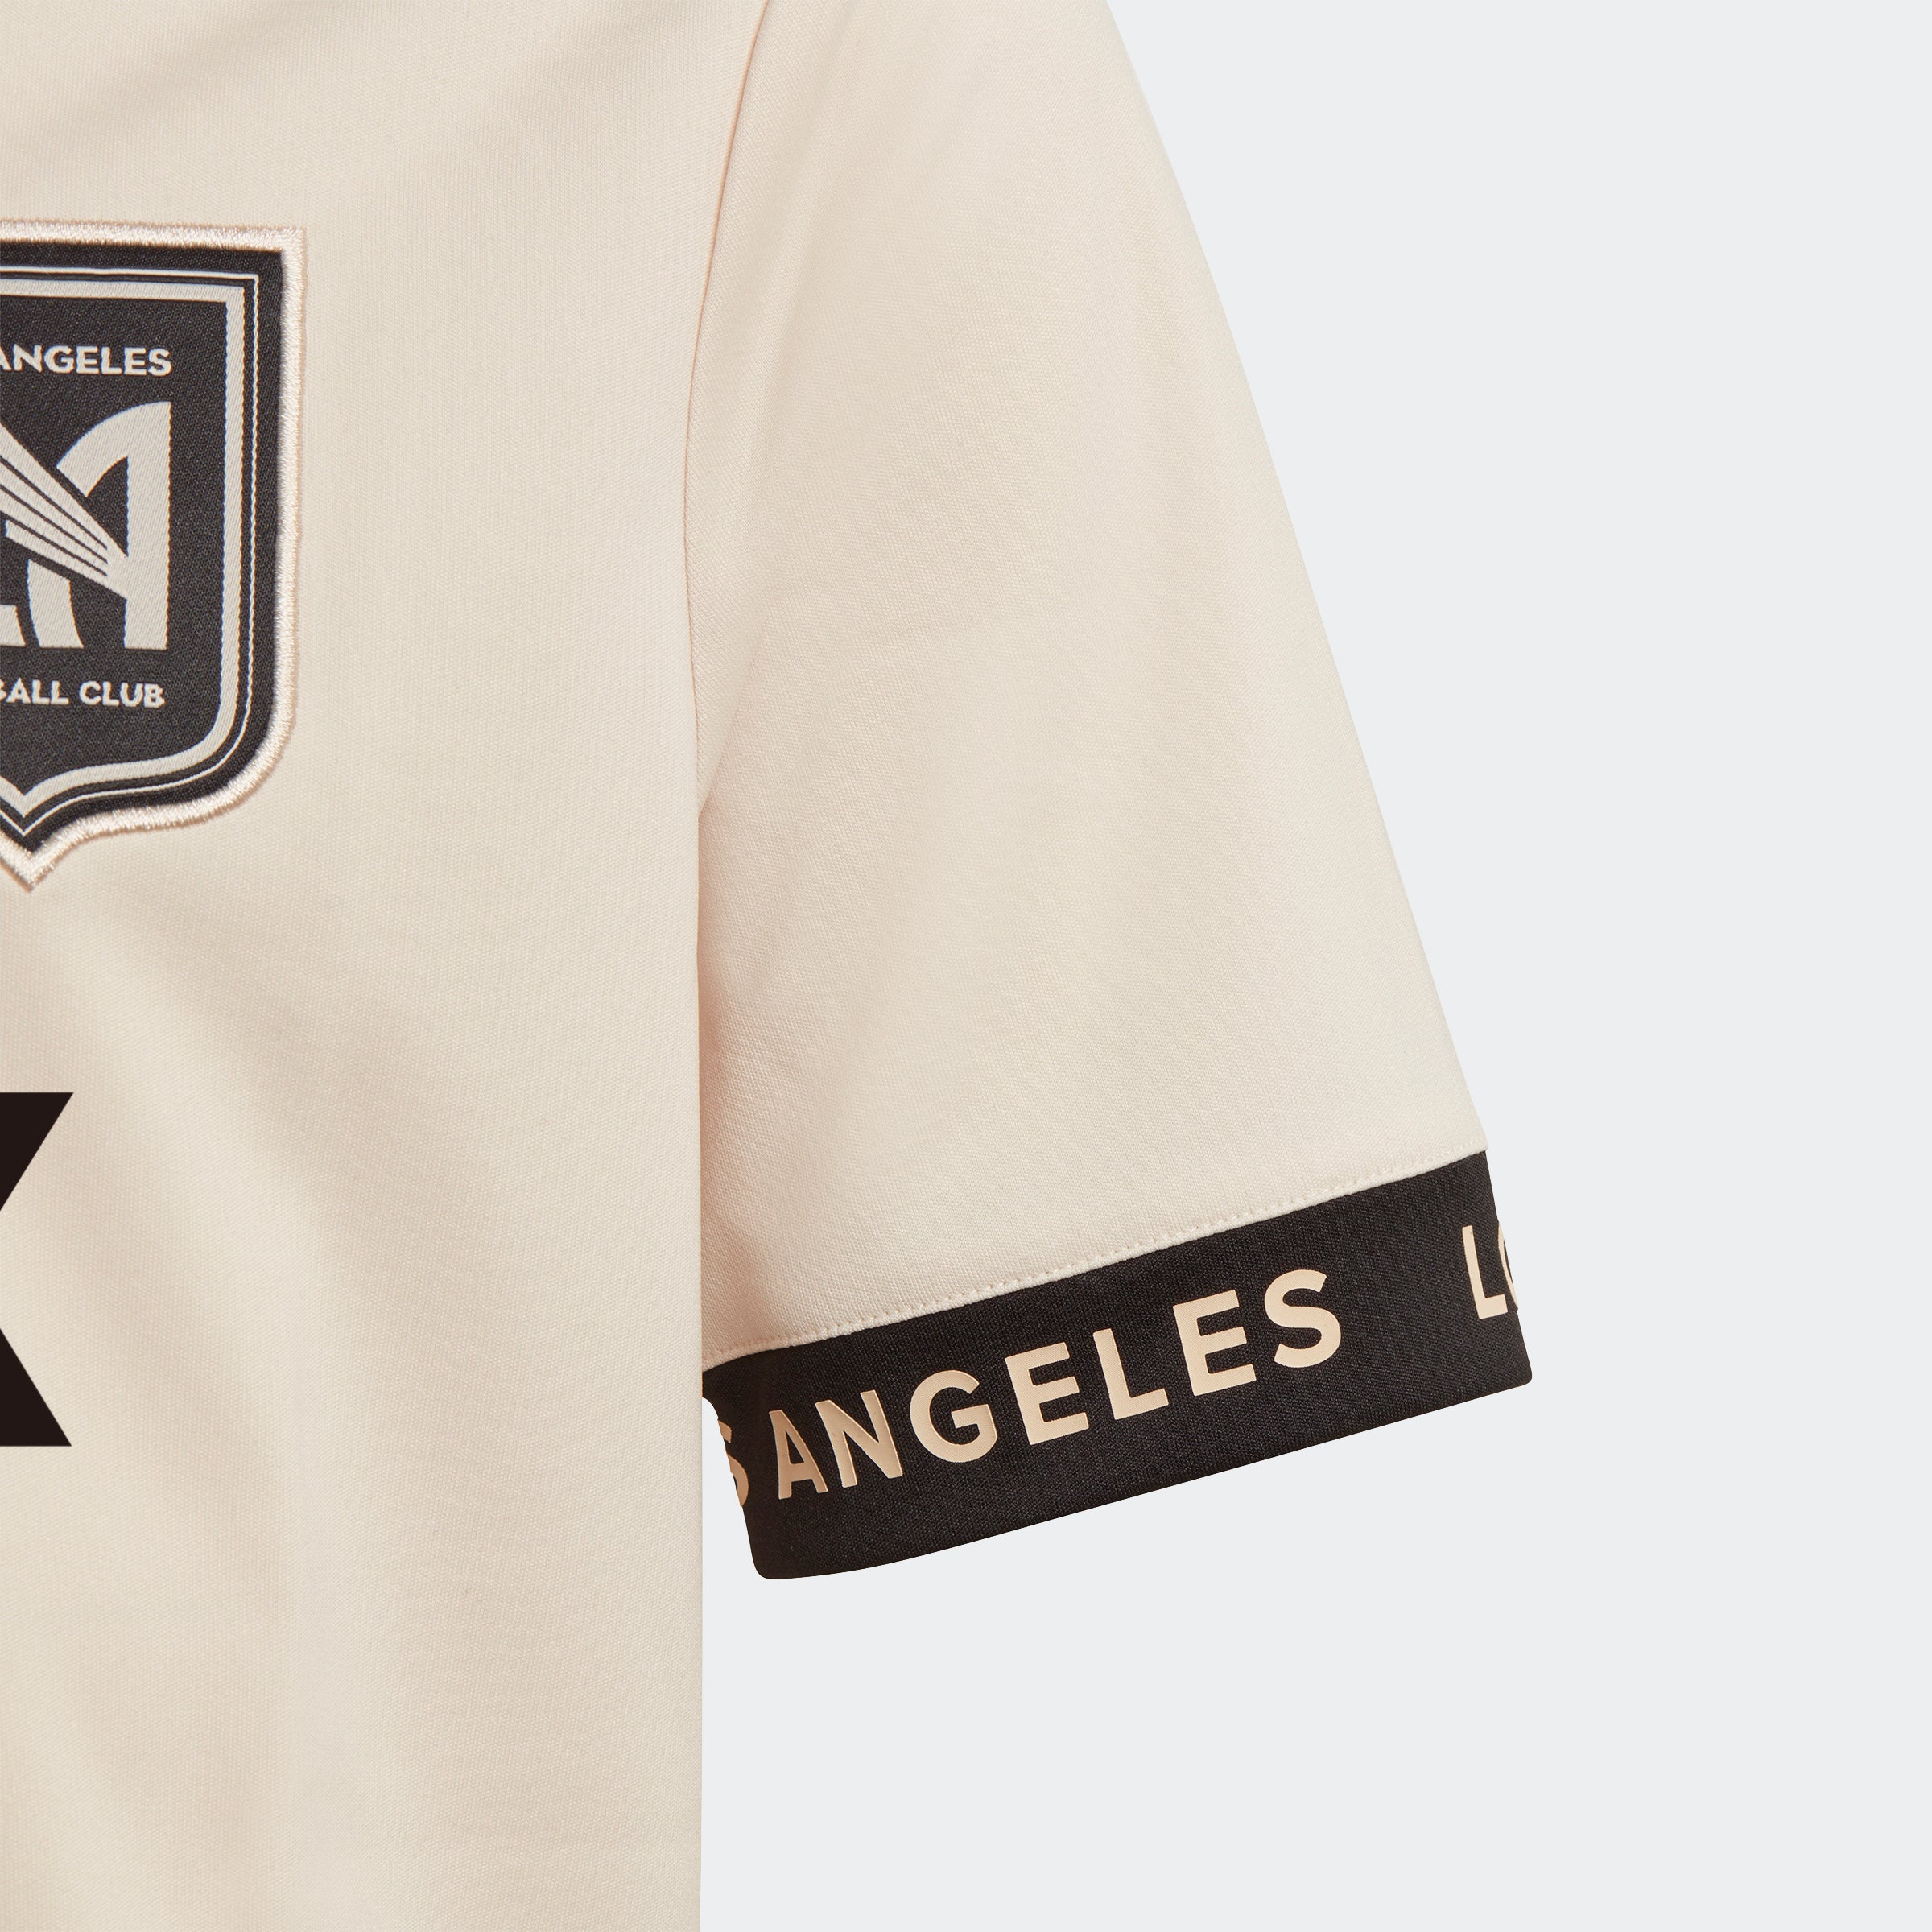  adidas LAFC 2018 Away Youth Jersey- White/Gold YS : Sports &  Outdoors